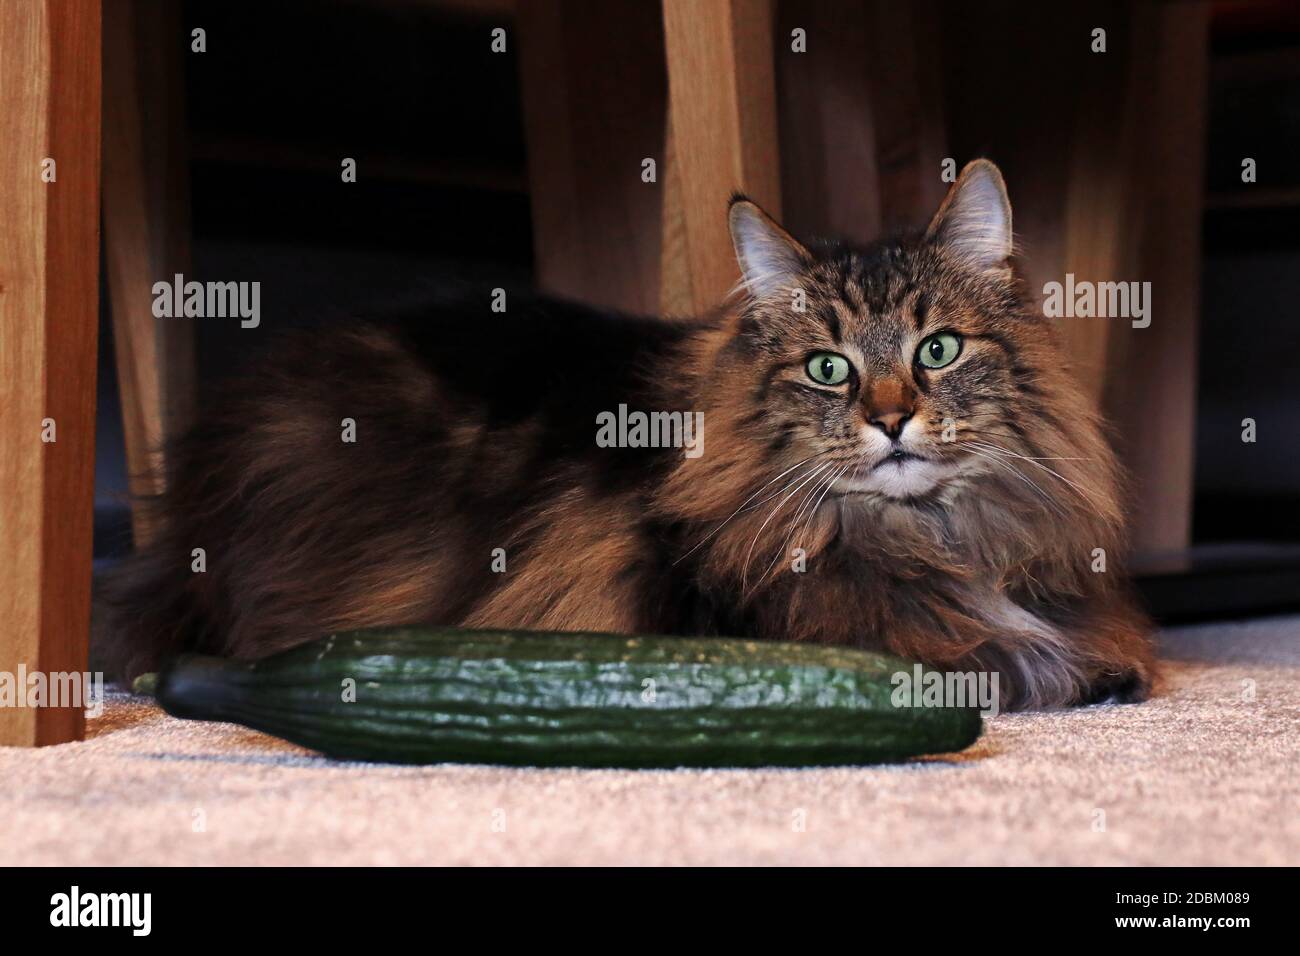 A Norwegian Forest Cat next to a cucumber. Cats are not always afraid of cucumbers Stock Photo